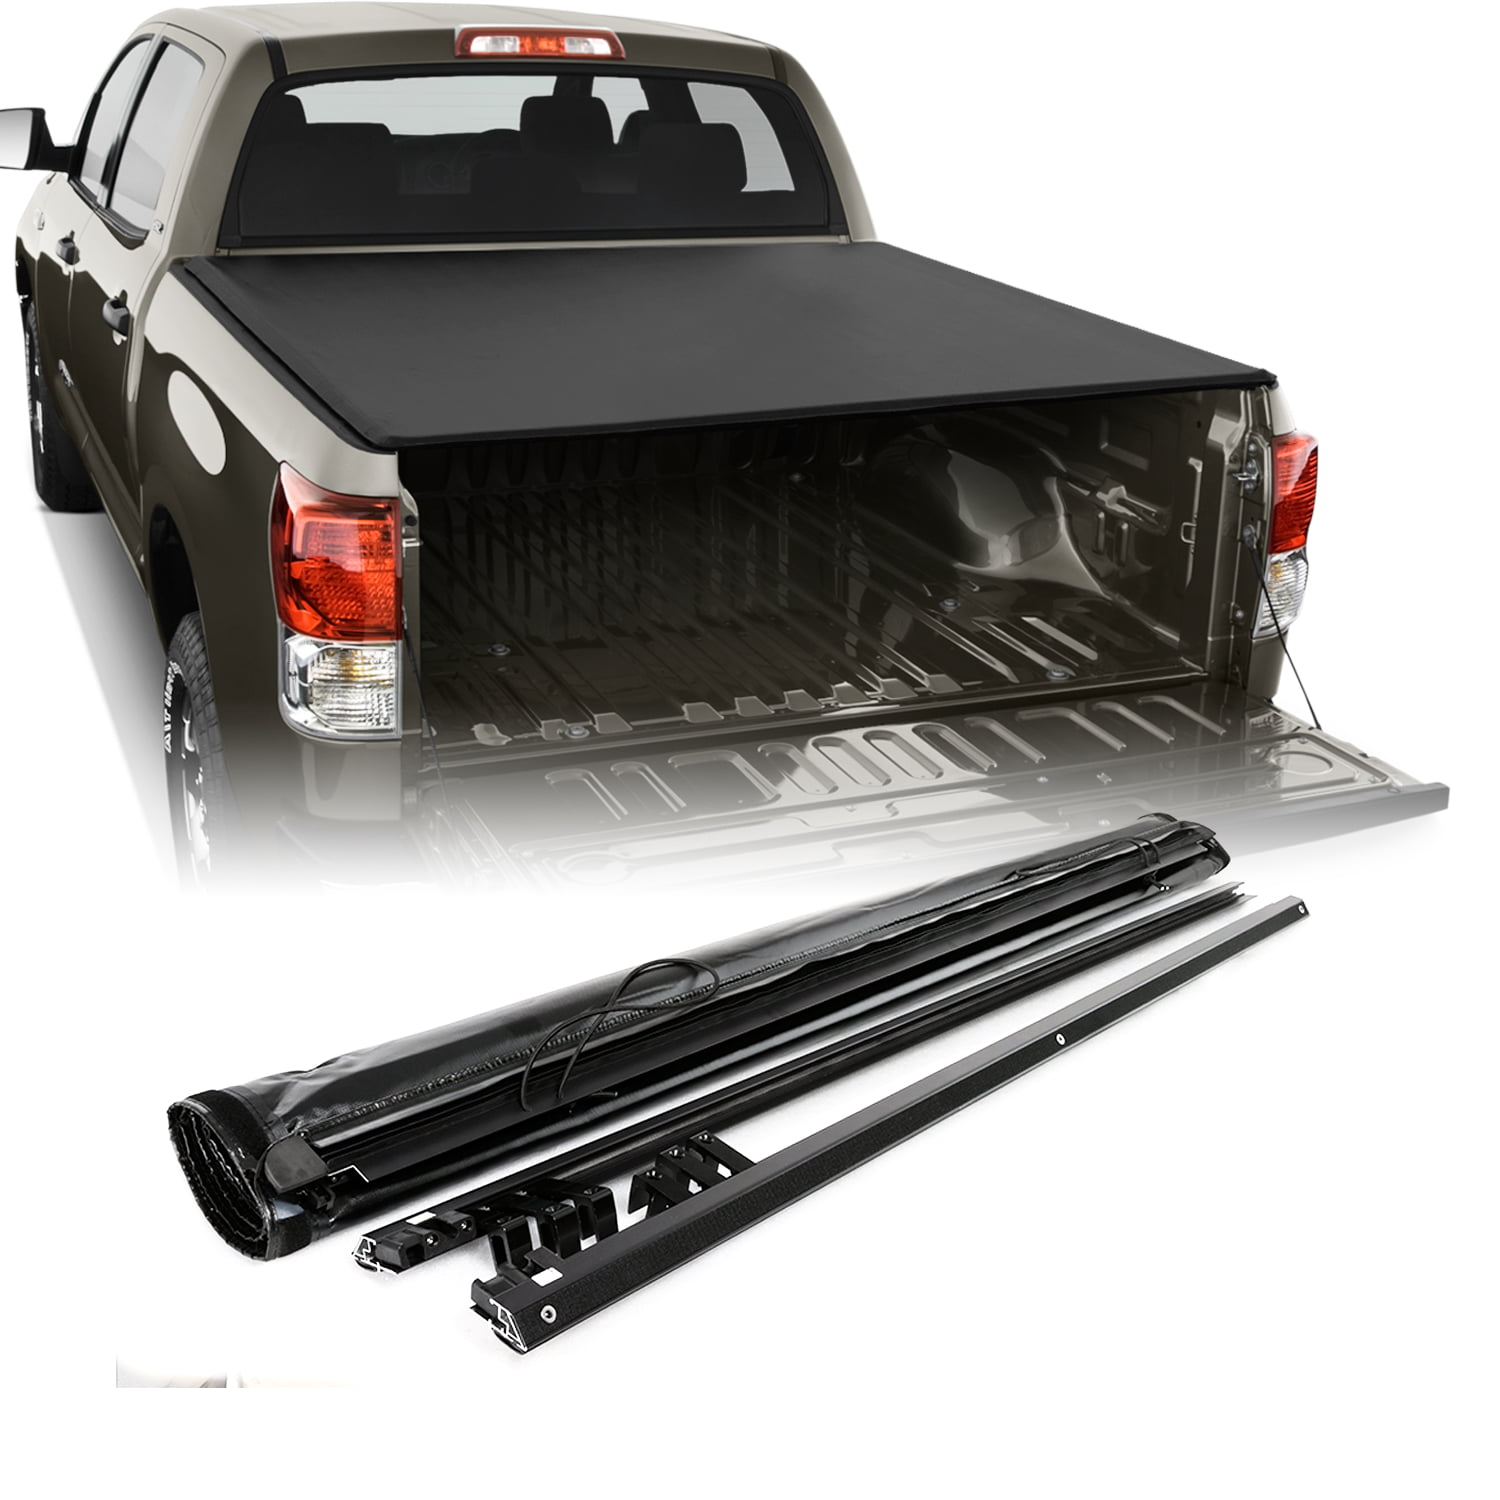 Fits 2007-2020 Toyota Tundra Standard/Extended Cab 6.5 Feet 78 Inches Bed Soft Roll Up Black Tonneau Cover Hardware